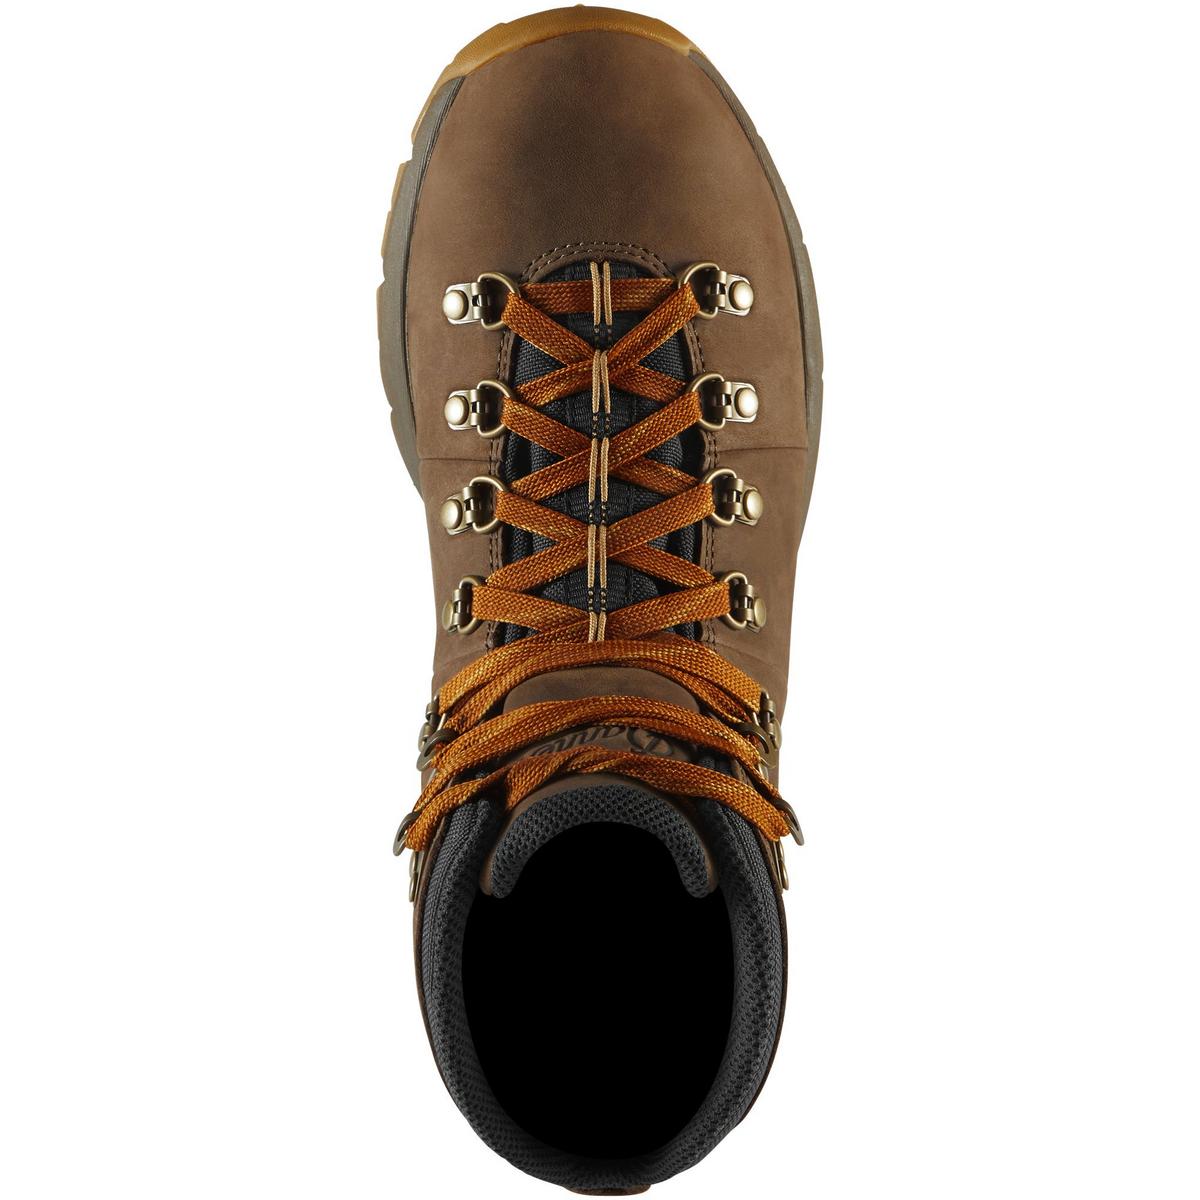 Danner Women's Mountain 600 Leaf Gore-Tex Hiking Boots - Brown